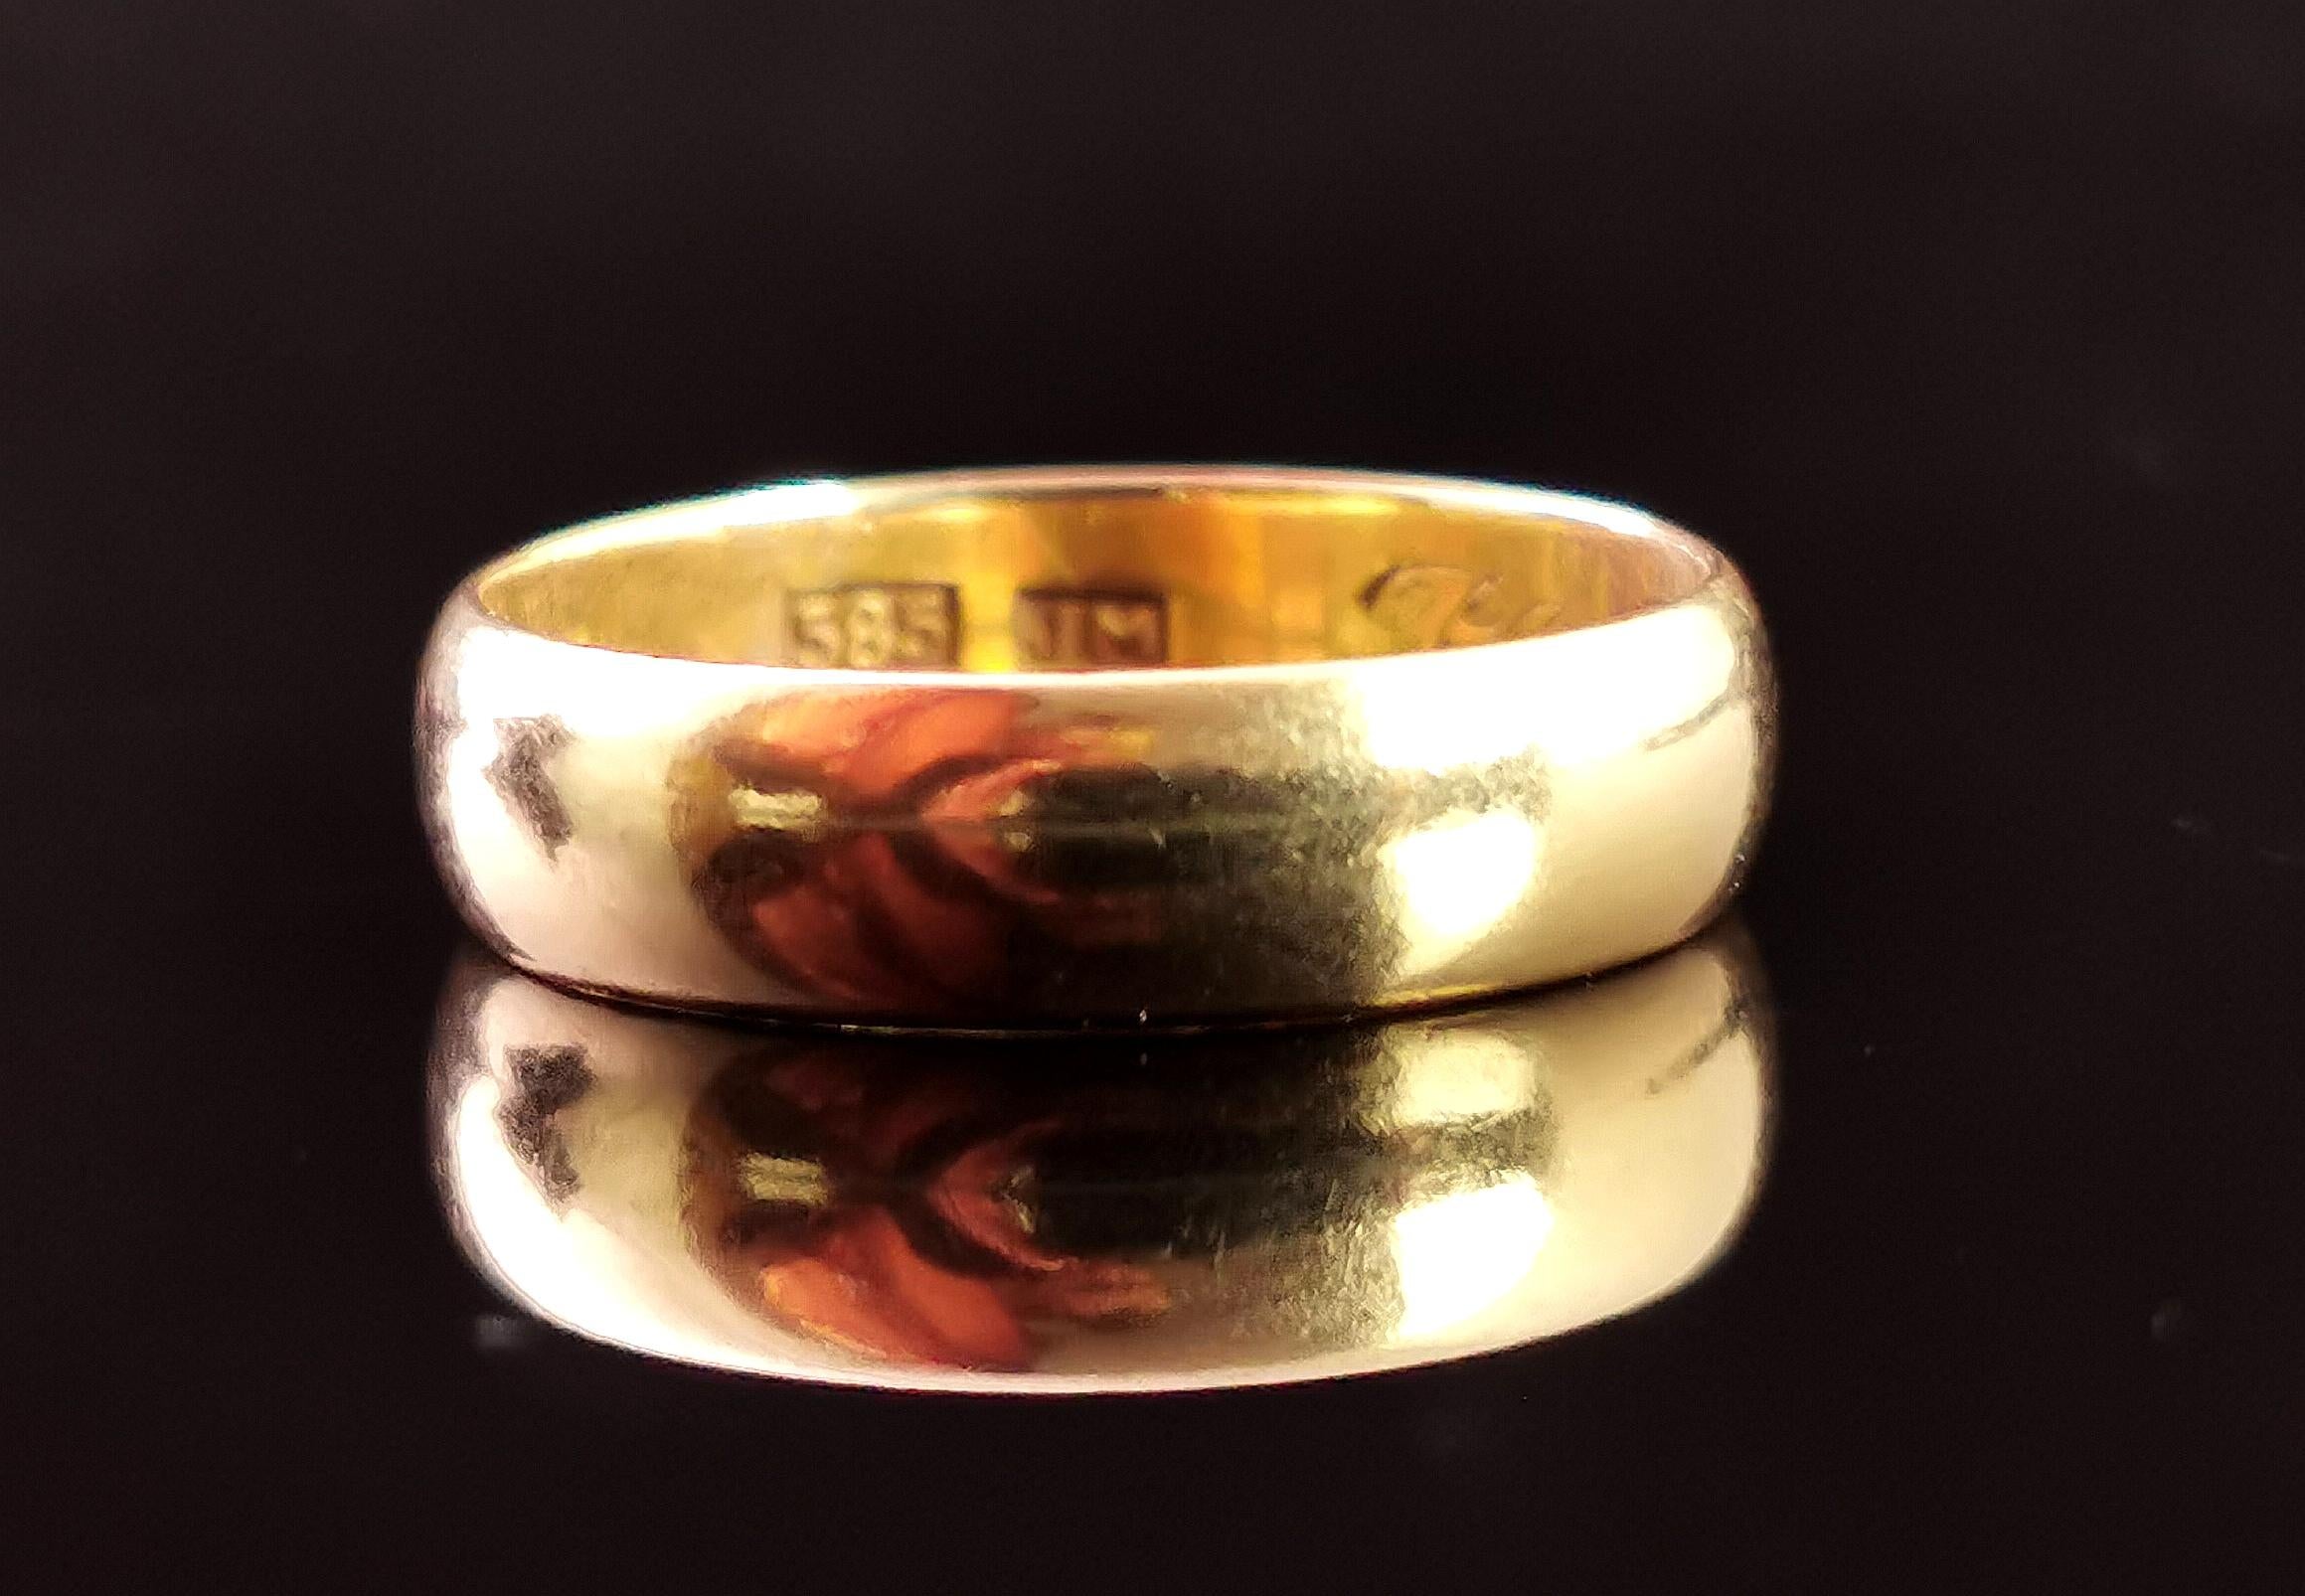 A gorgeous, early 1910s era 14ct gold band ring or wedding ring.

Rich, warm, golden 14ct yellow gold, this lovely hue is only ever found on antique gold.

It has a soft D profile and it has a good weight to it, the band is approximately 5.2mm width